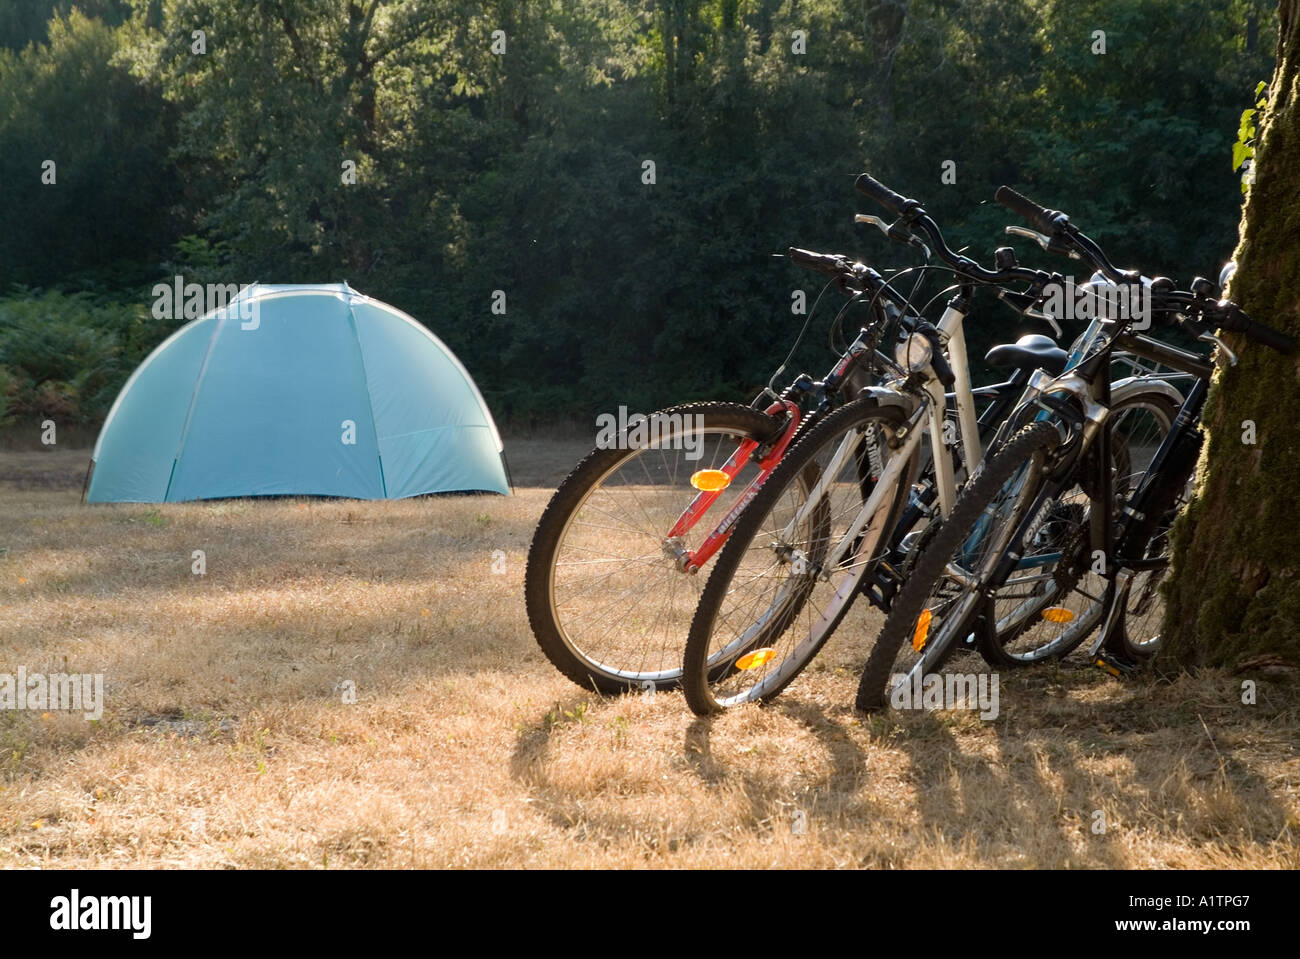 Camping - Bicycles leaning against a tree trunk with tent in background at dusk on a summer holiday. Stock Photo